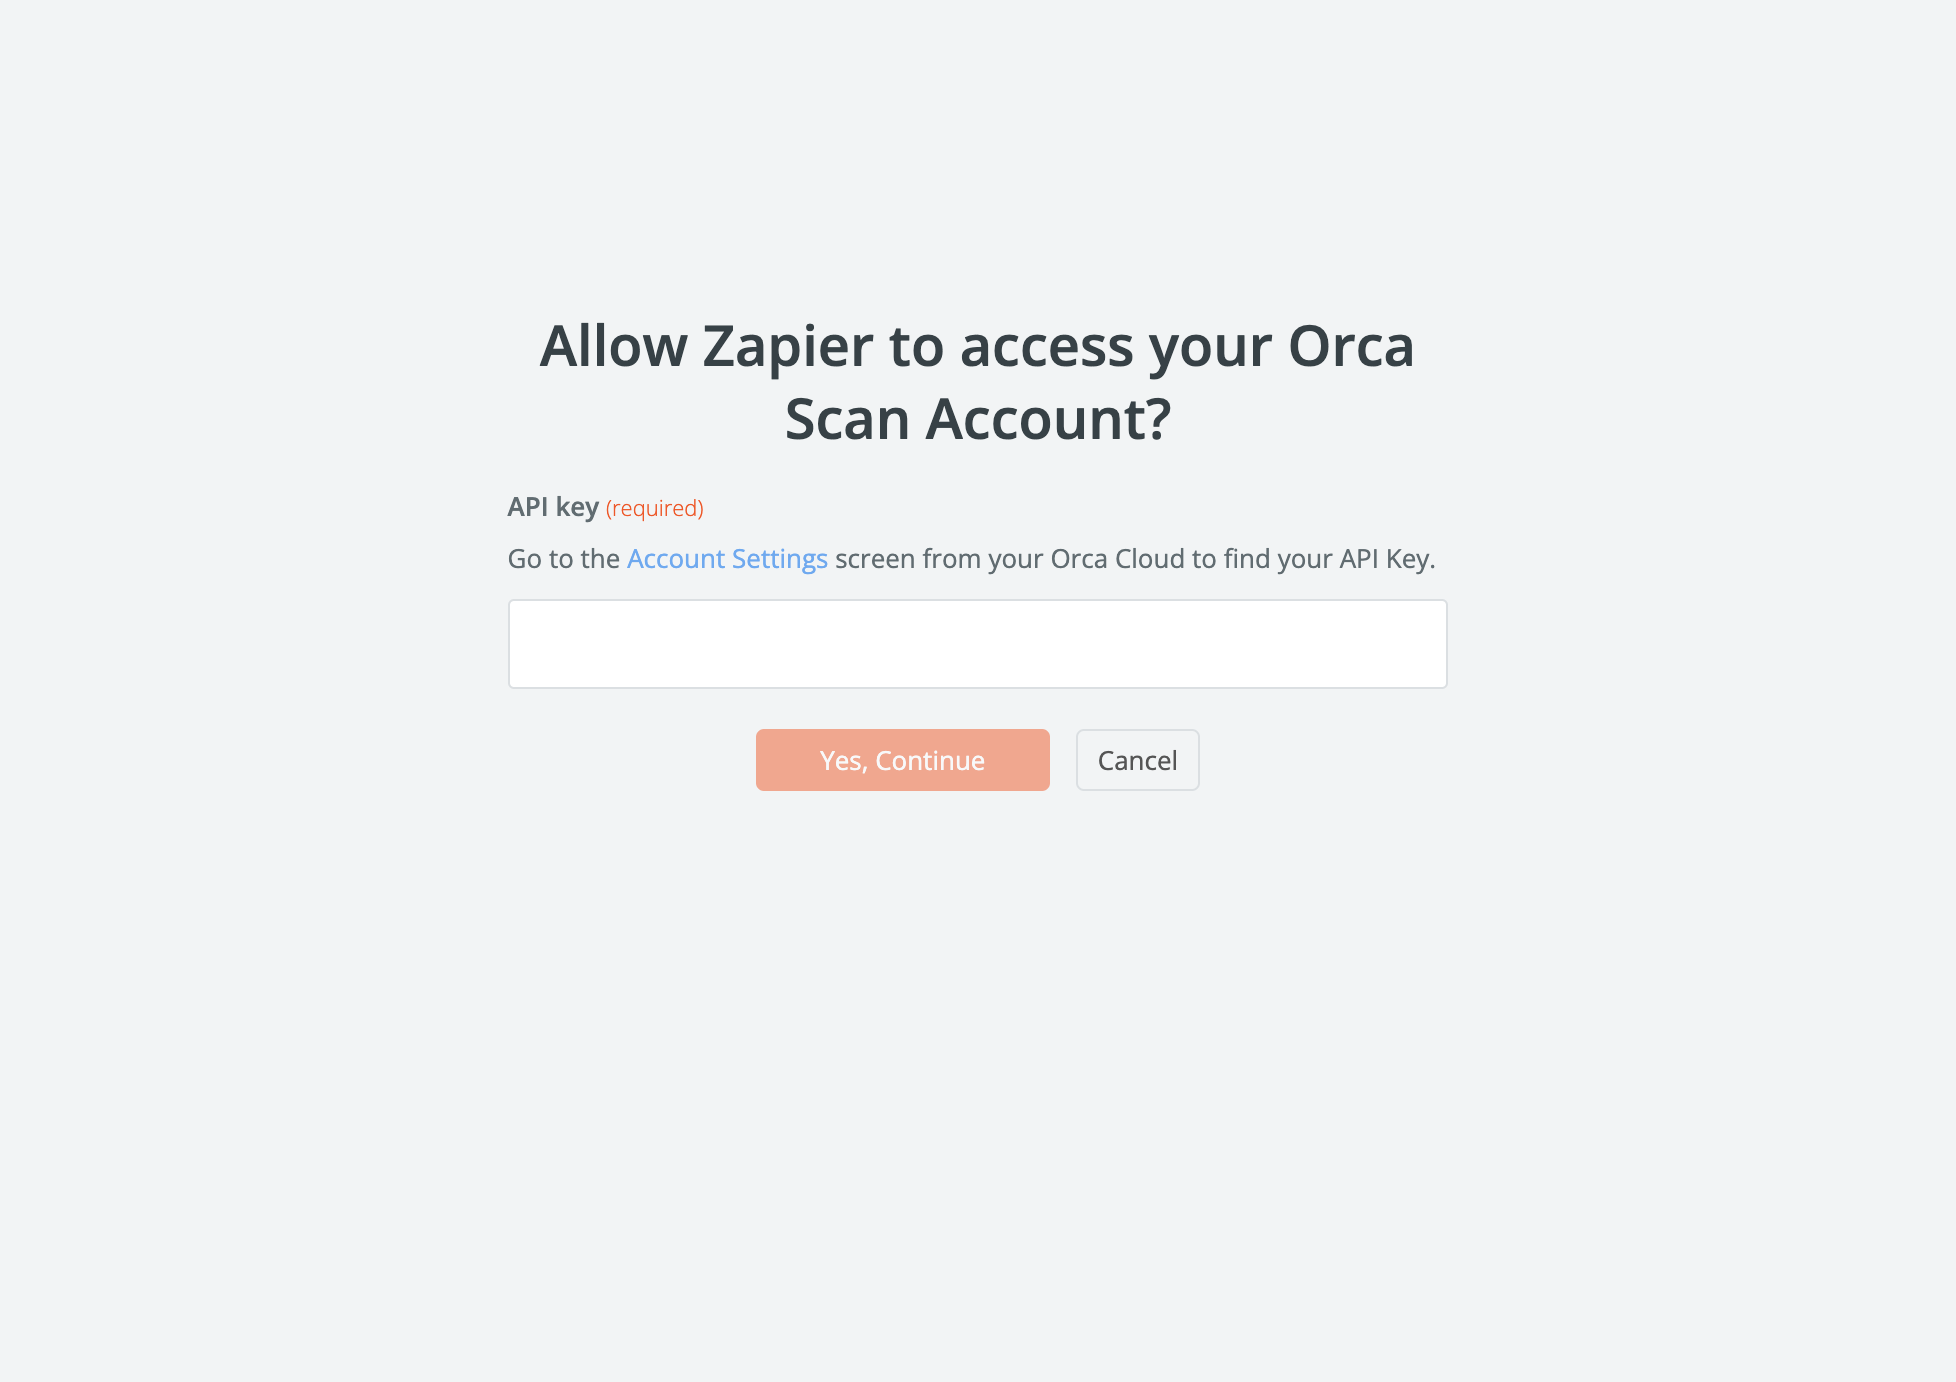 Copy and paste your Orca Scan API key into Zapier to complete the connection.